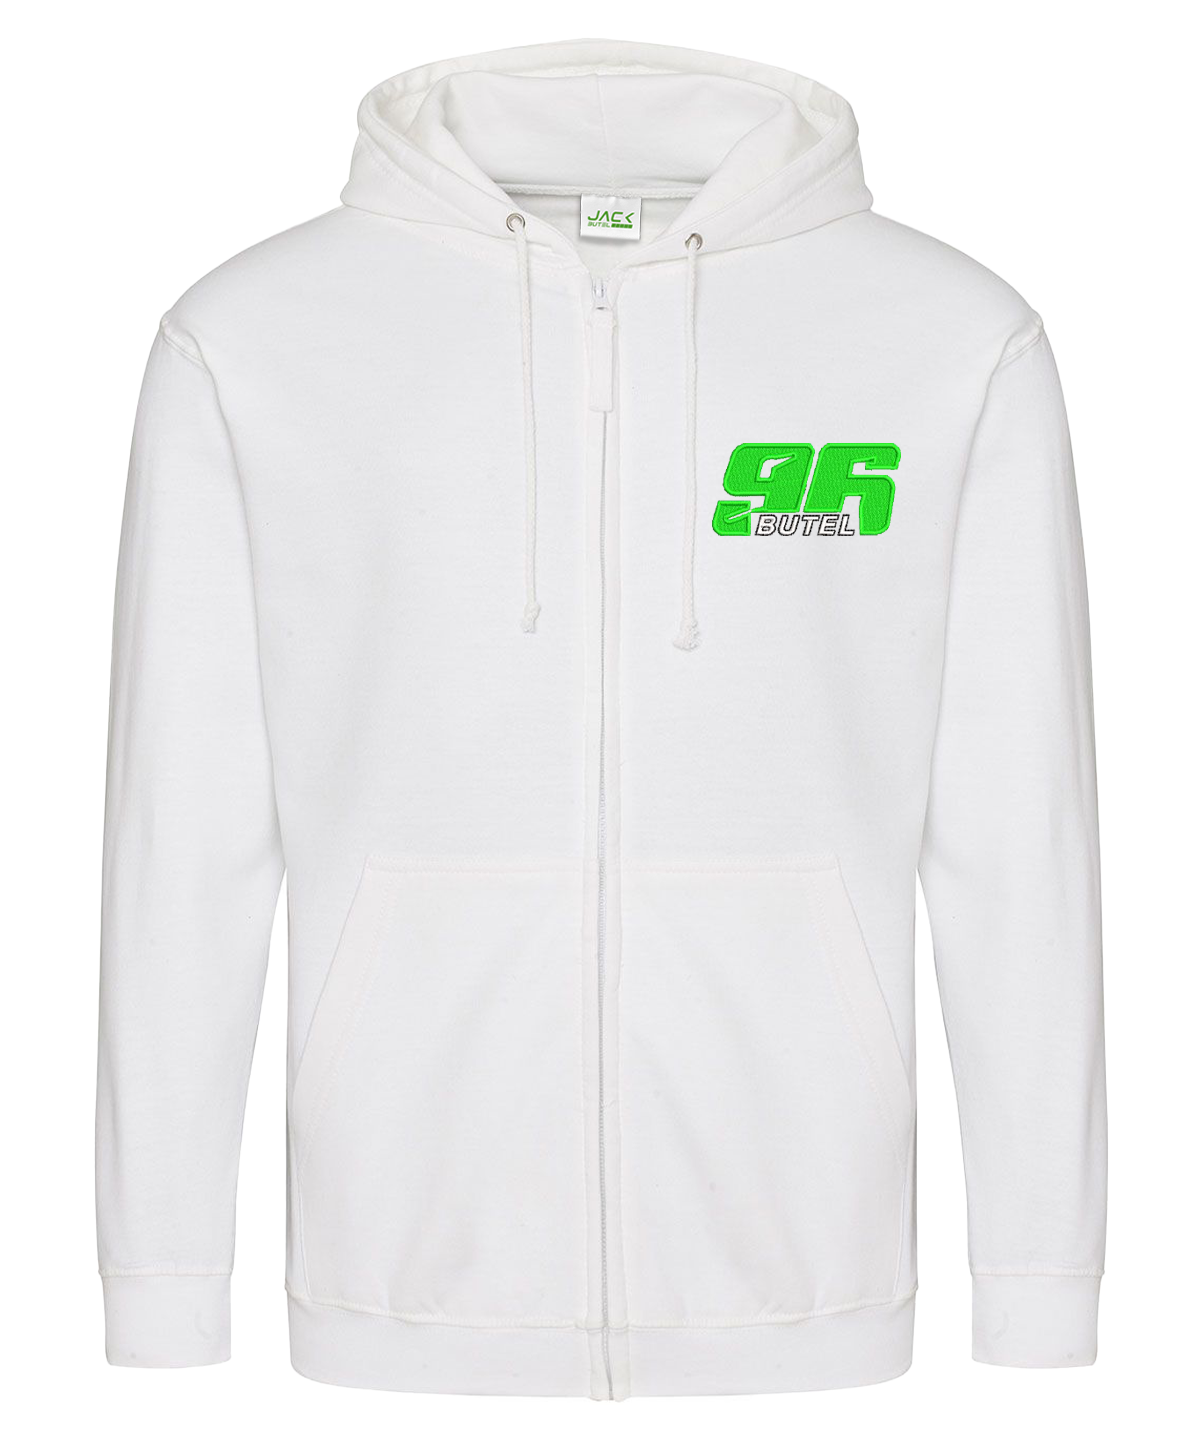 96 BUTEL  Zip Up Adult Hoody (Choice of Colour)